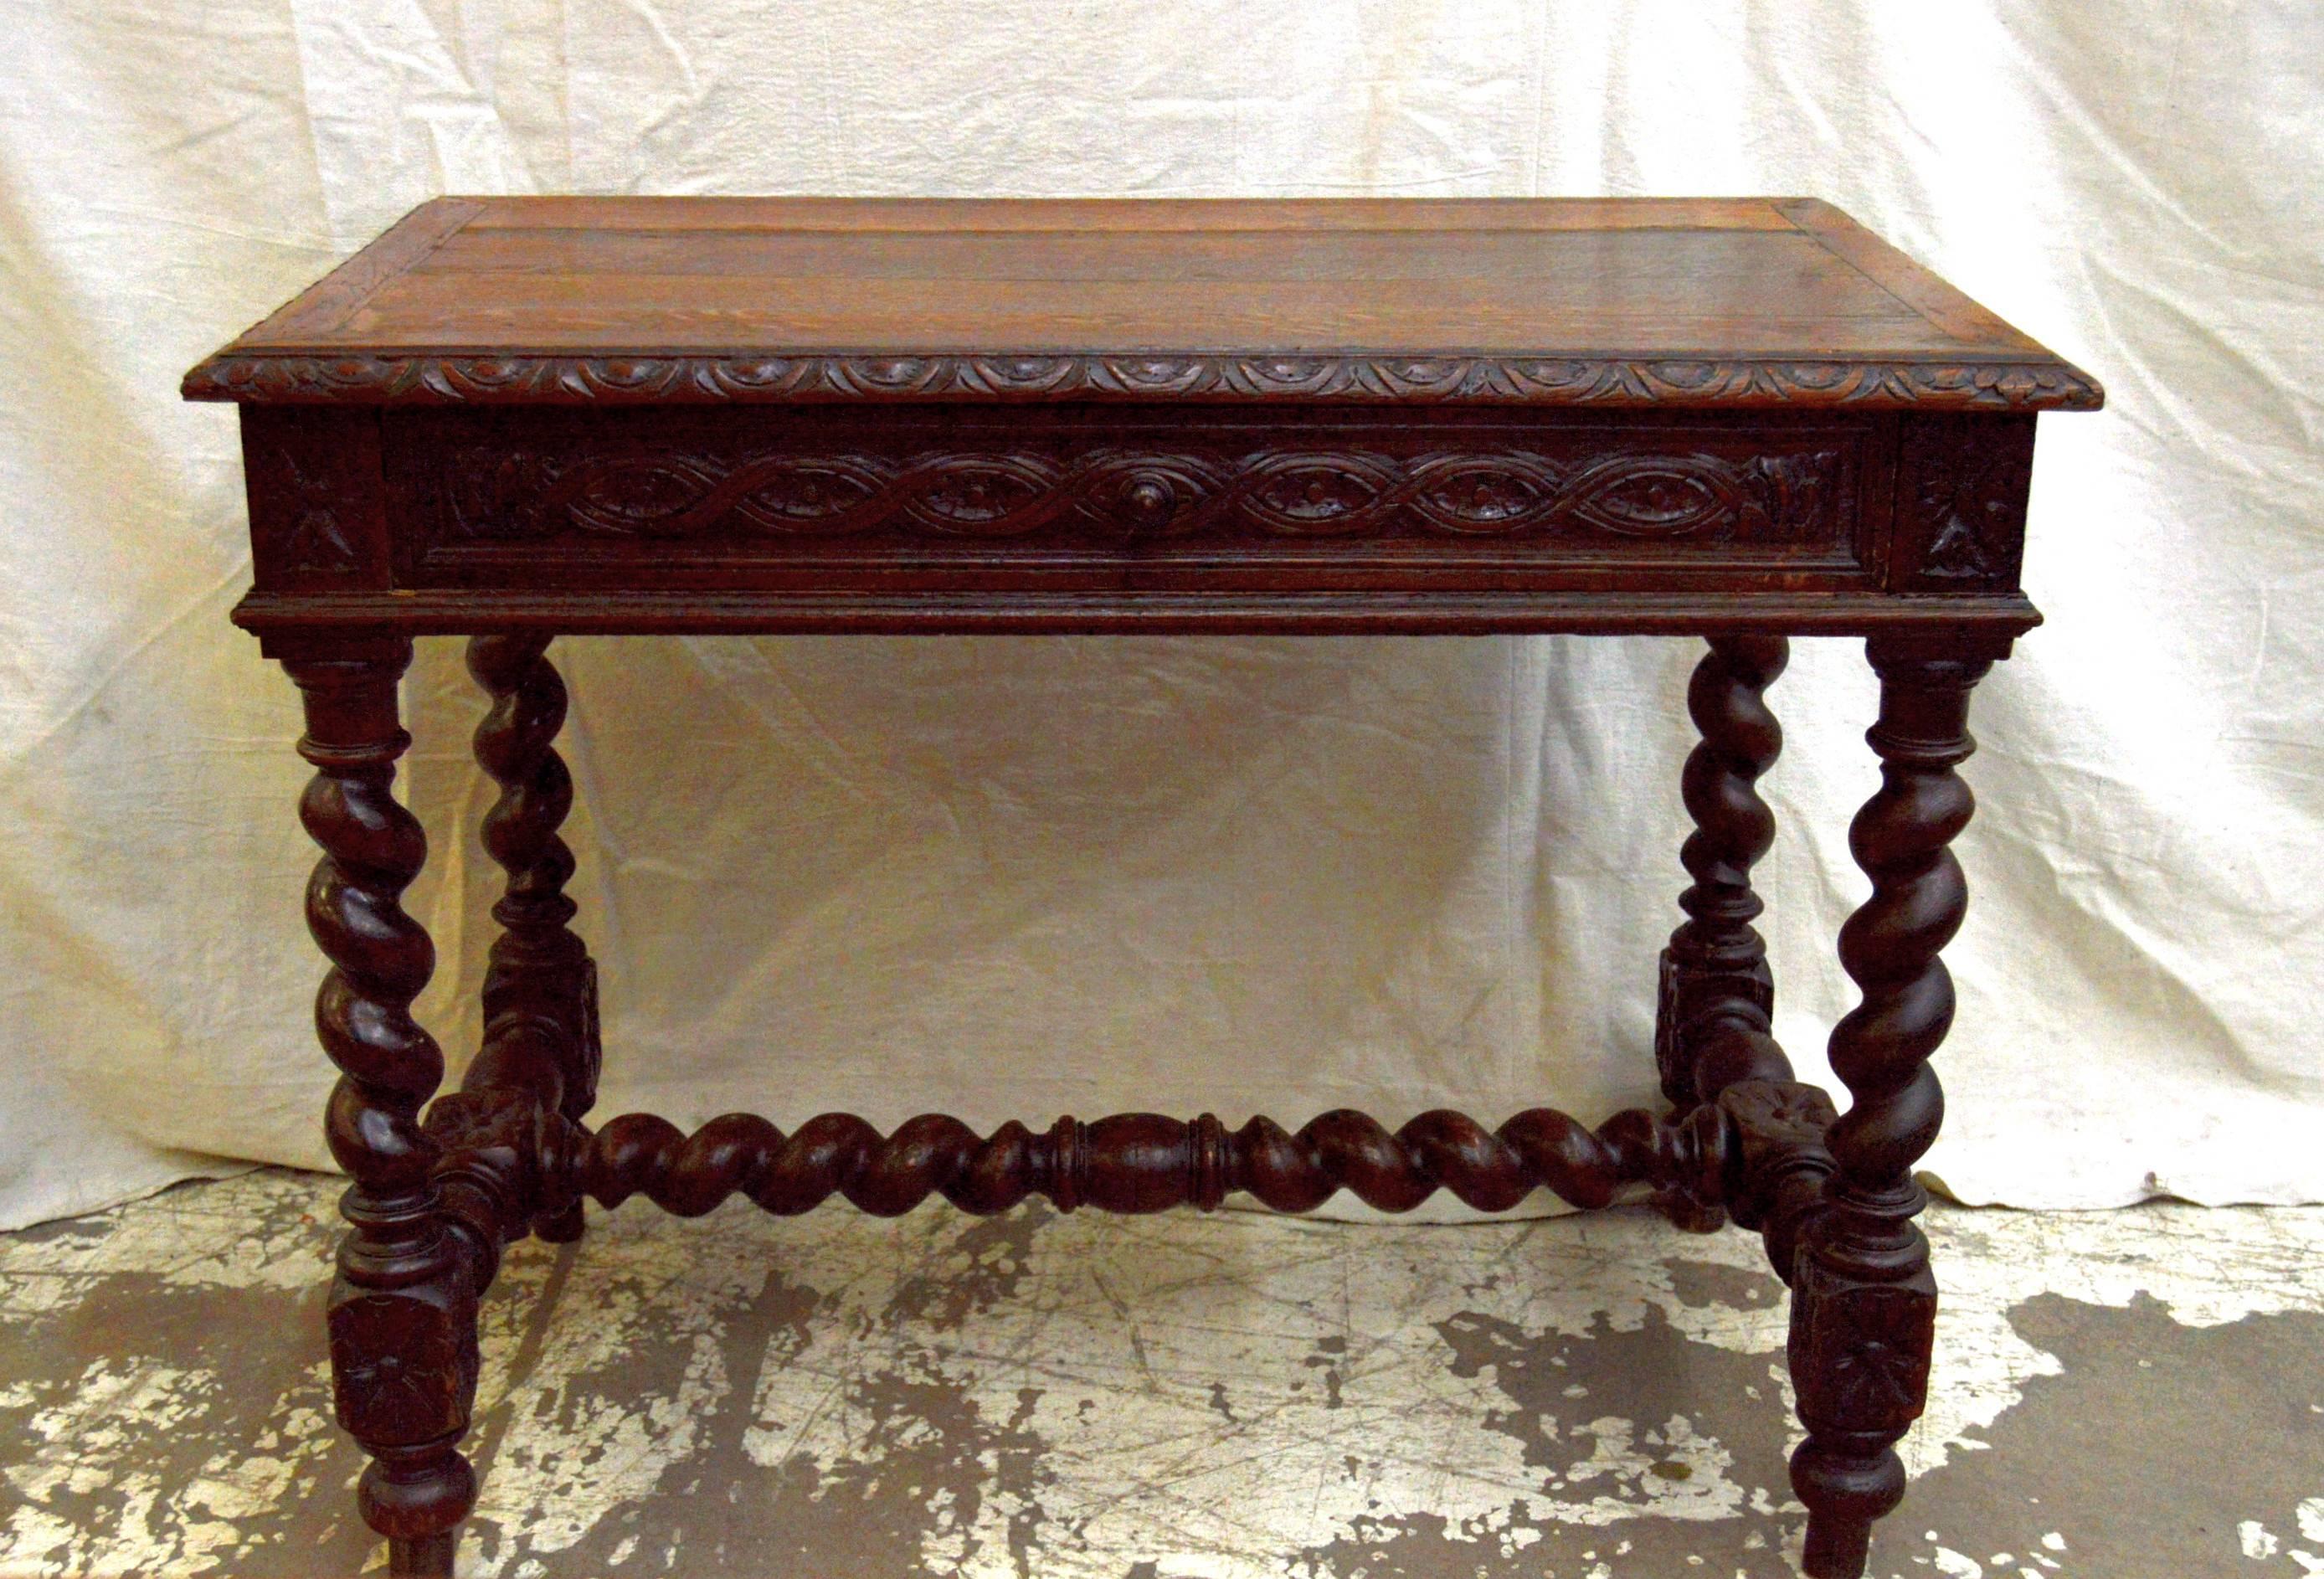 French 19th century writing table in Louis XIII style.